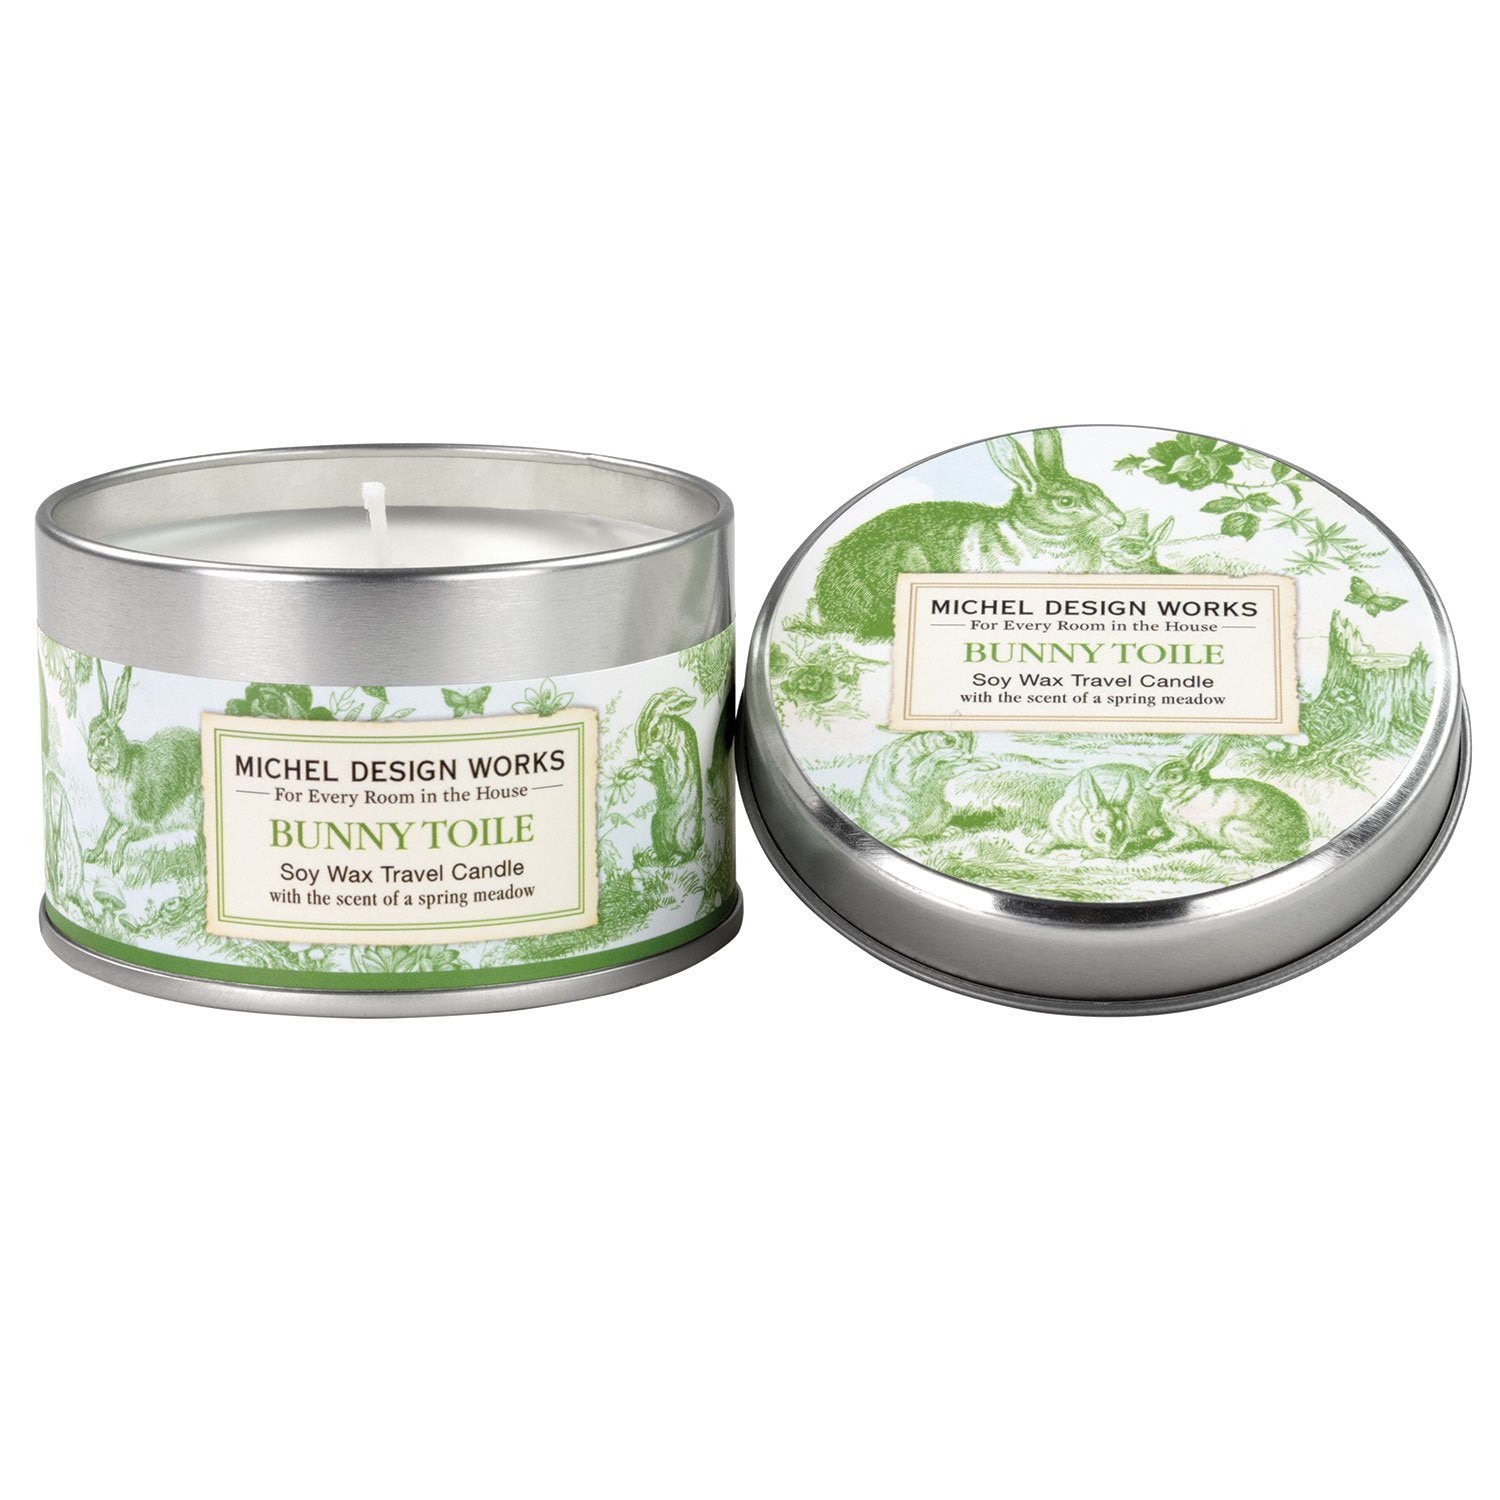 Bunny Toile Travel Soy Candle